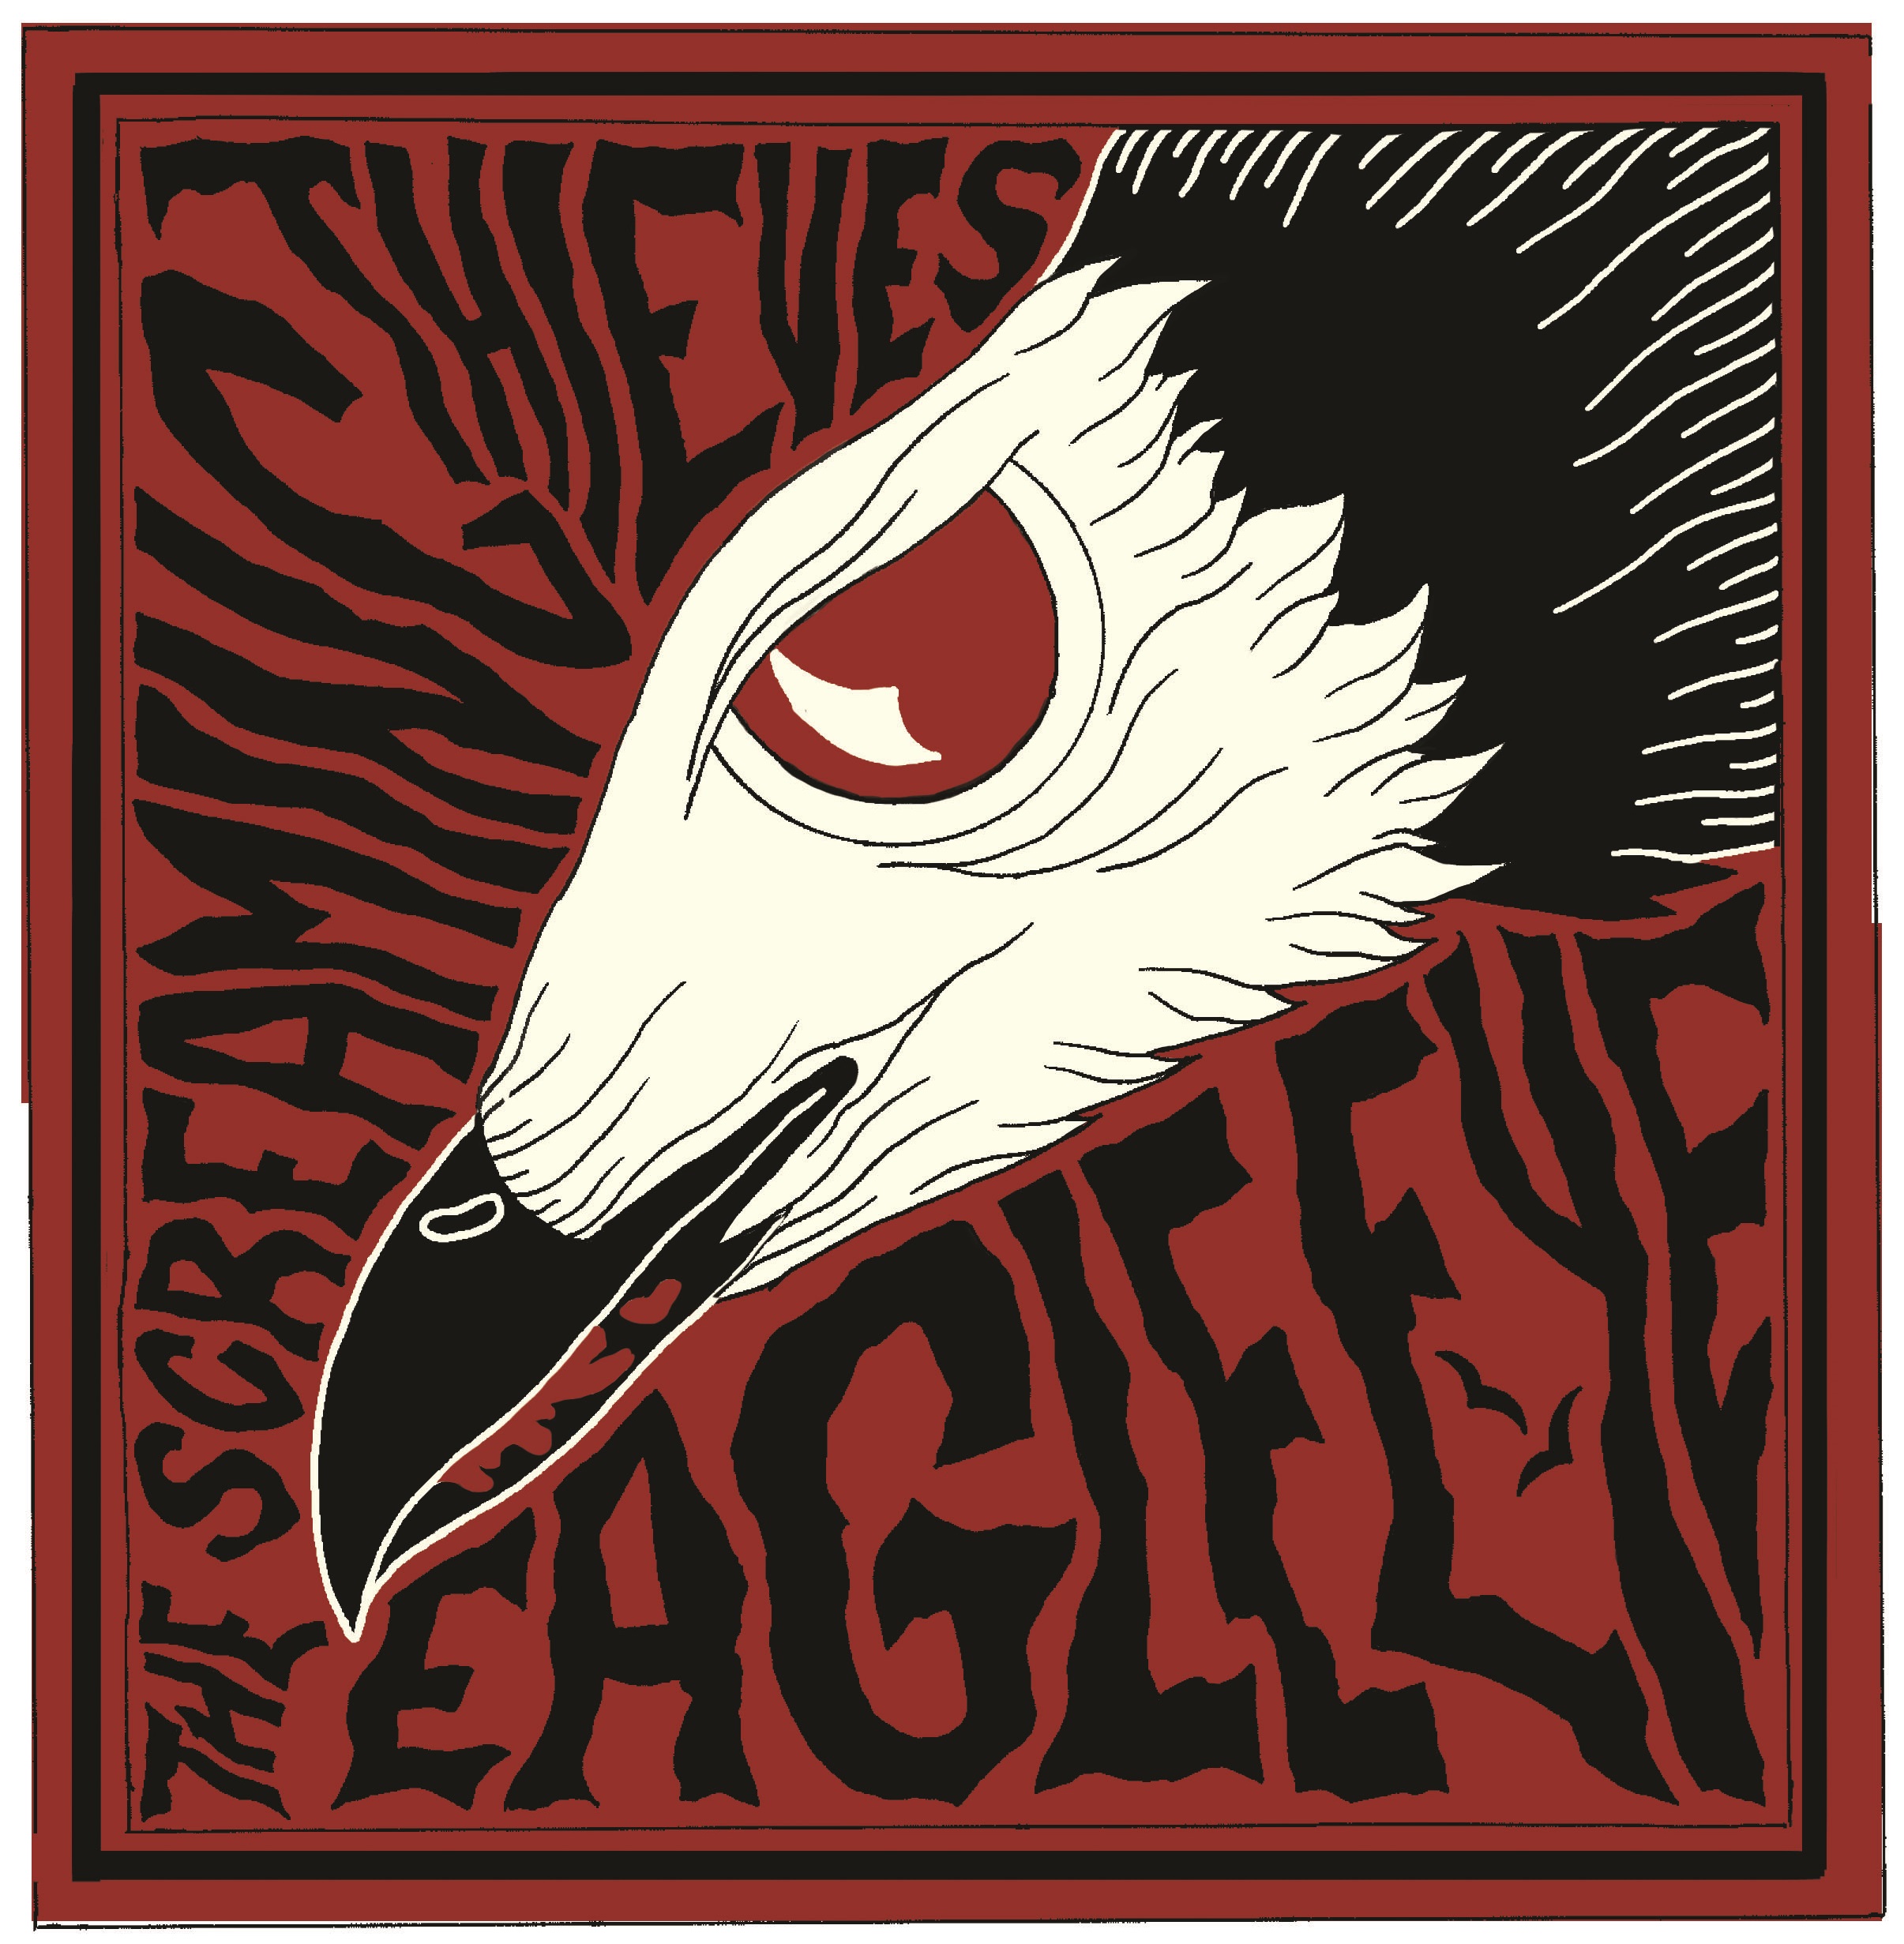 The Screaming Thieves "Eagle Eye" Album Cover